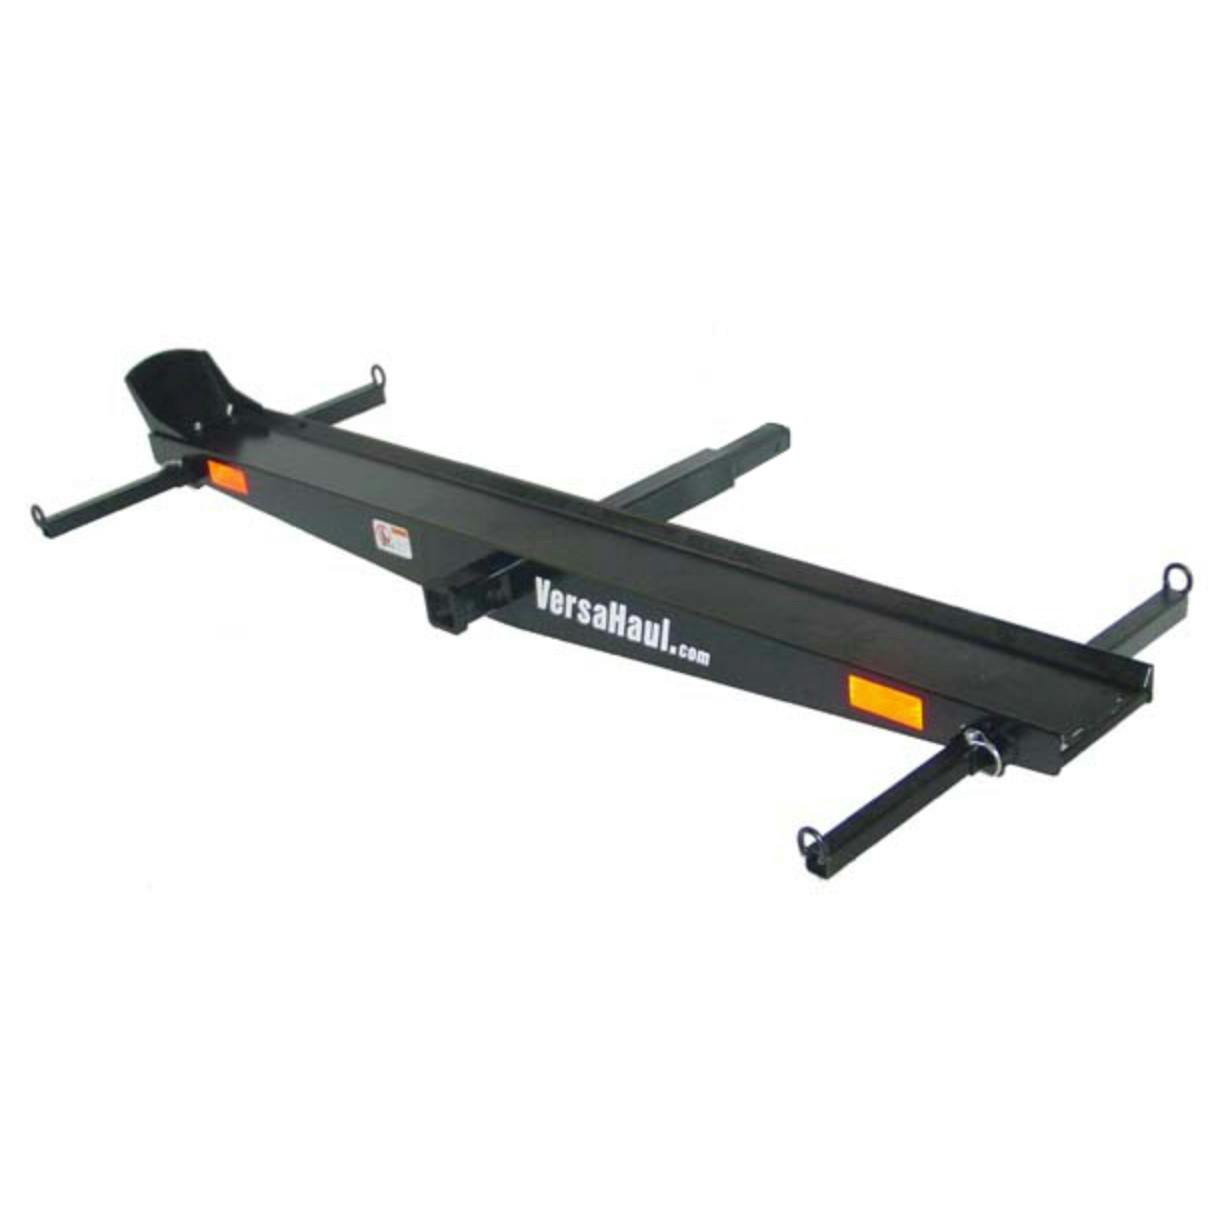 VersaHaul Sport Motorcycle Carrier angled on White Background